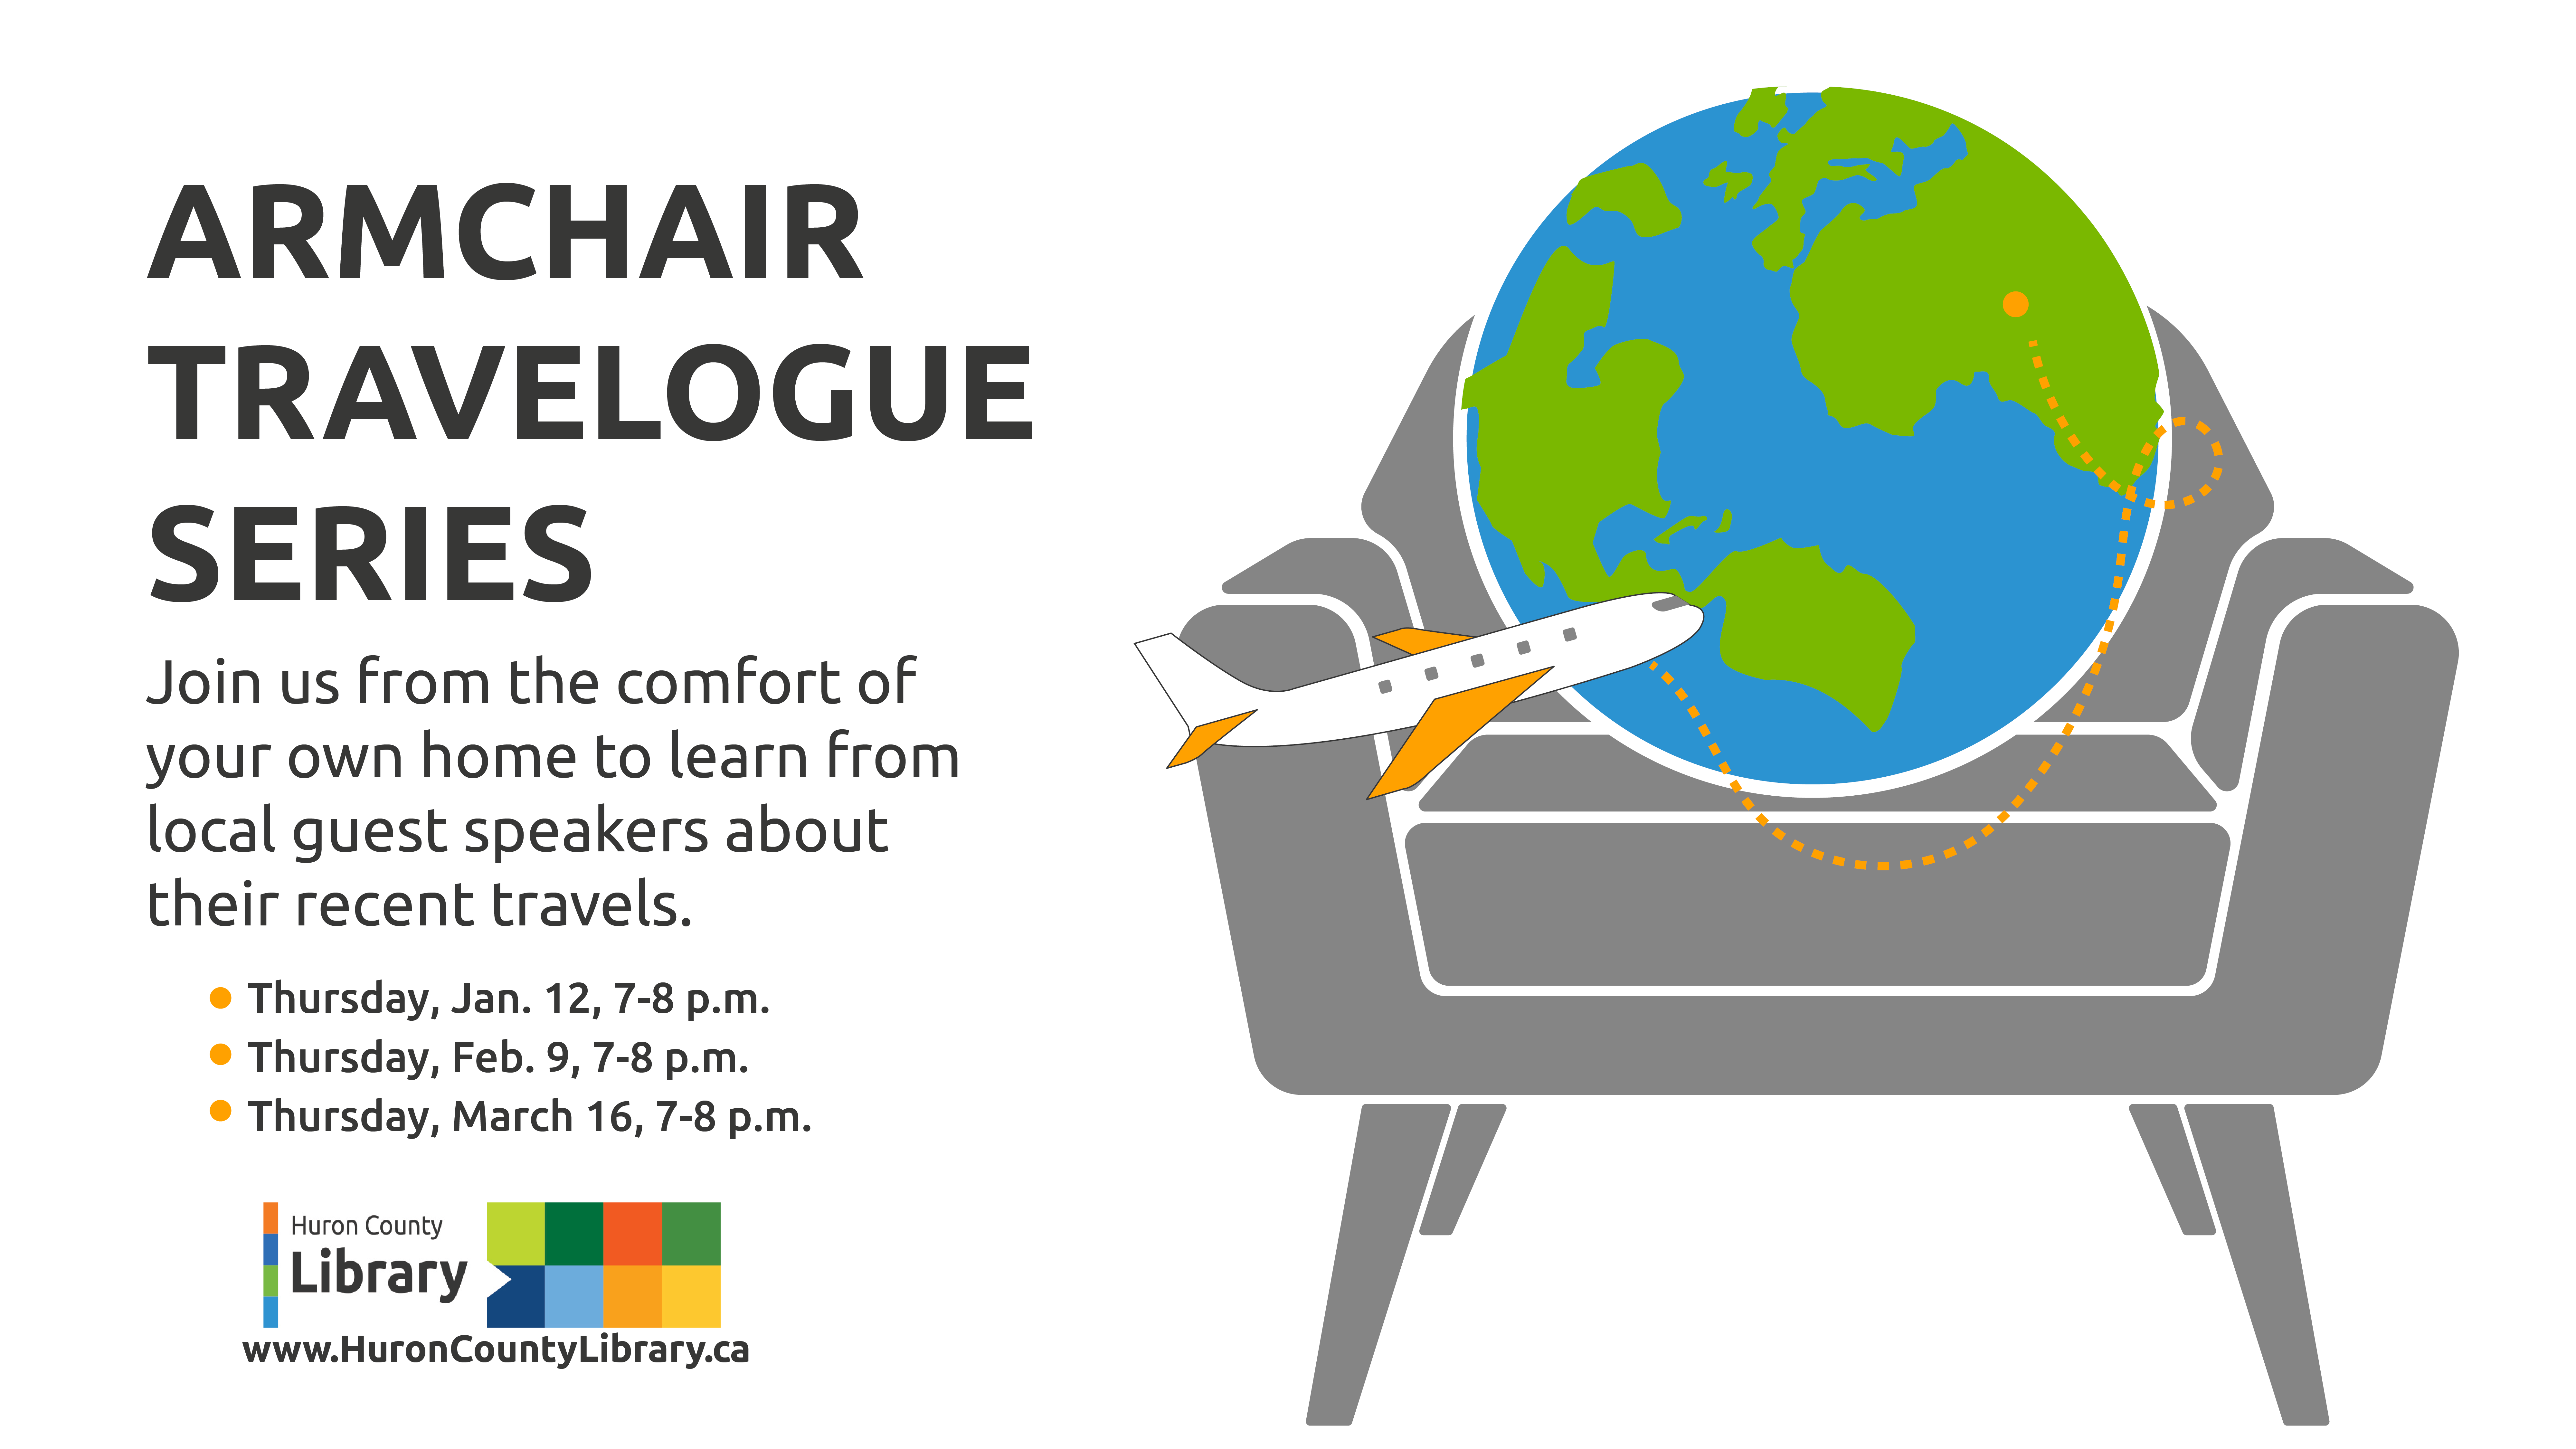 Illustration of an armchair with an illustration of the world and airplane flying around